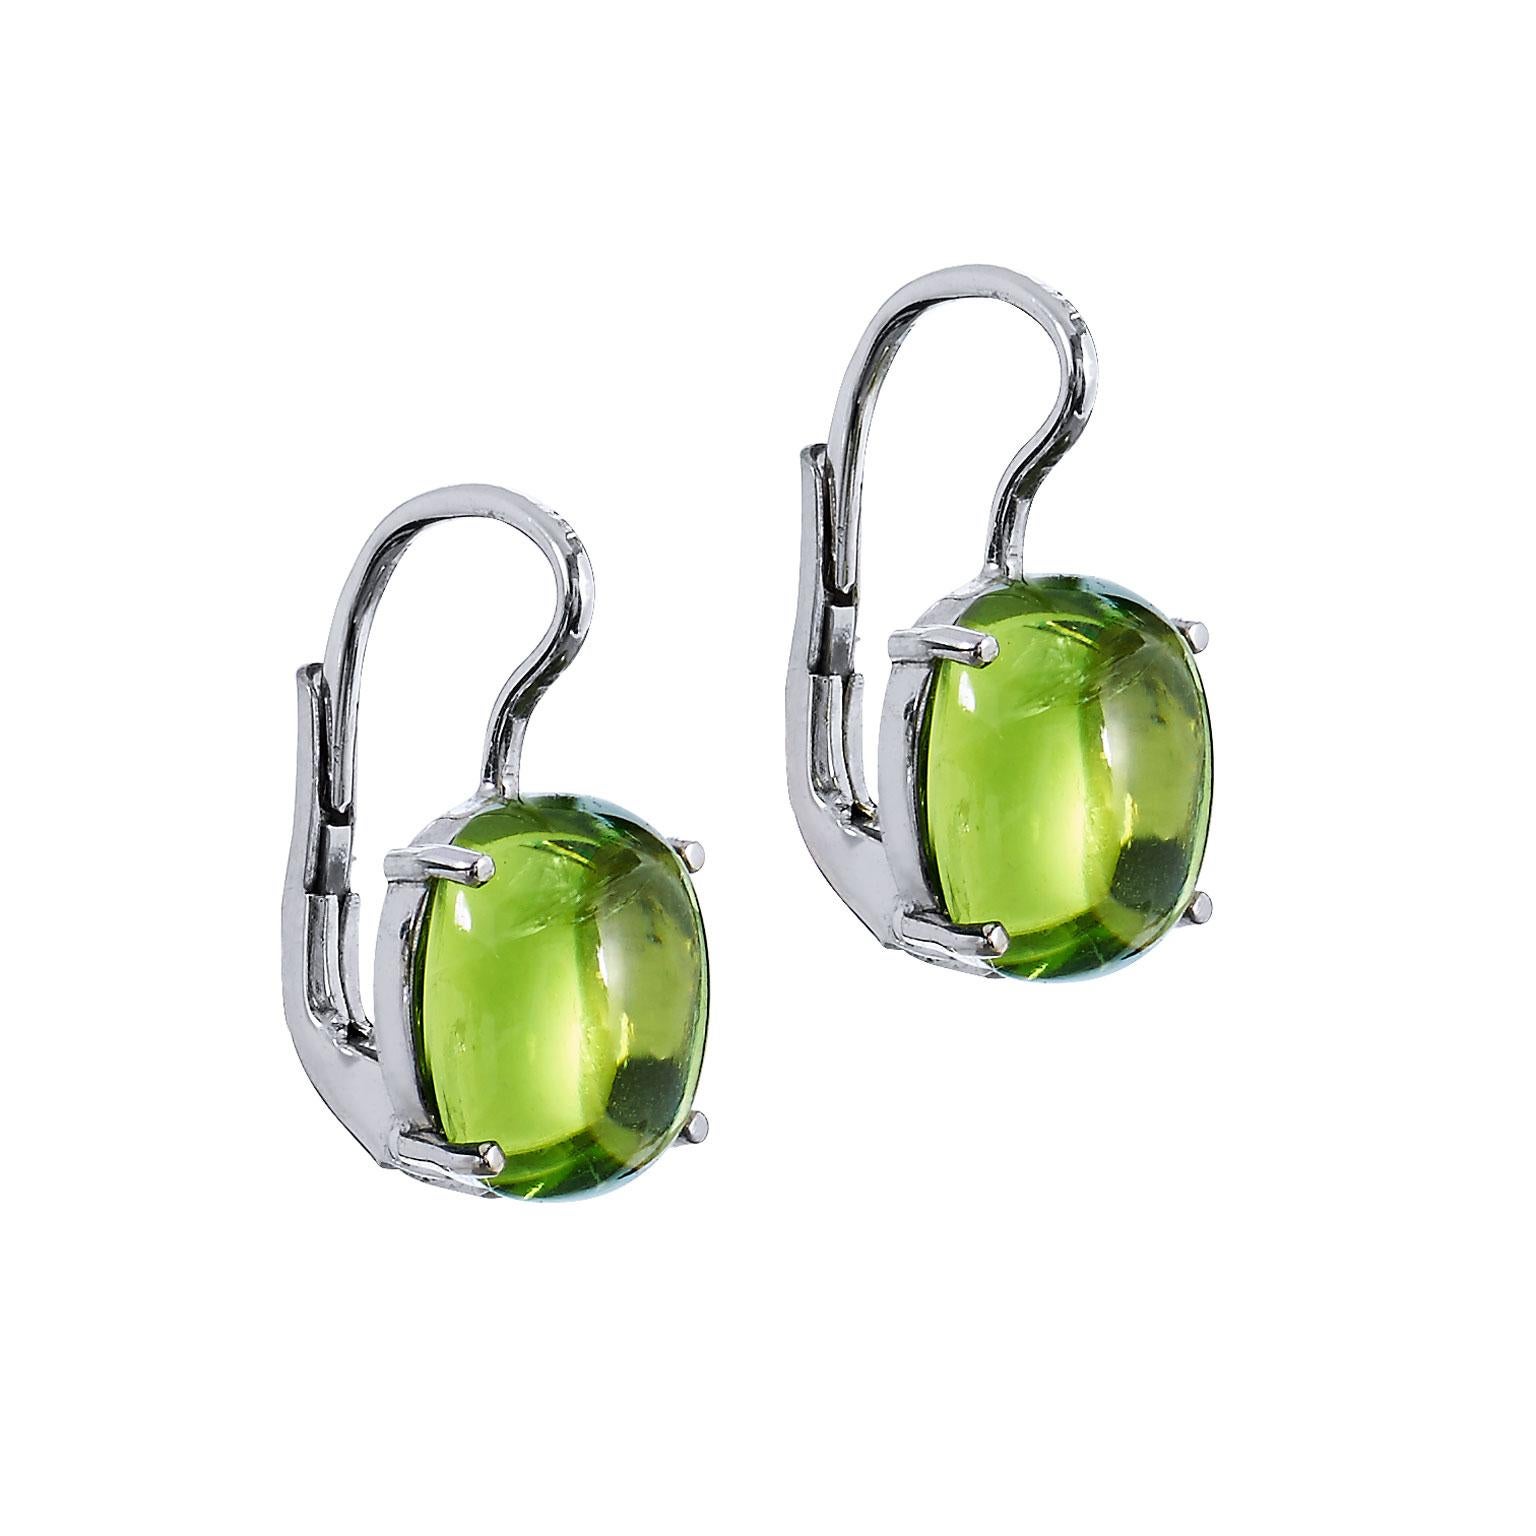 5.47 Carat Peridot Prong Set Drop Lever-Back Earrings set in 18 karat White Gold

Two green peridots, with a total weight of 5.47 carat, are prong-set and fashioned in 18 karat white gold in these handmade lever-back earrings.